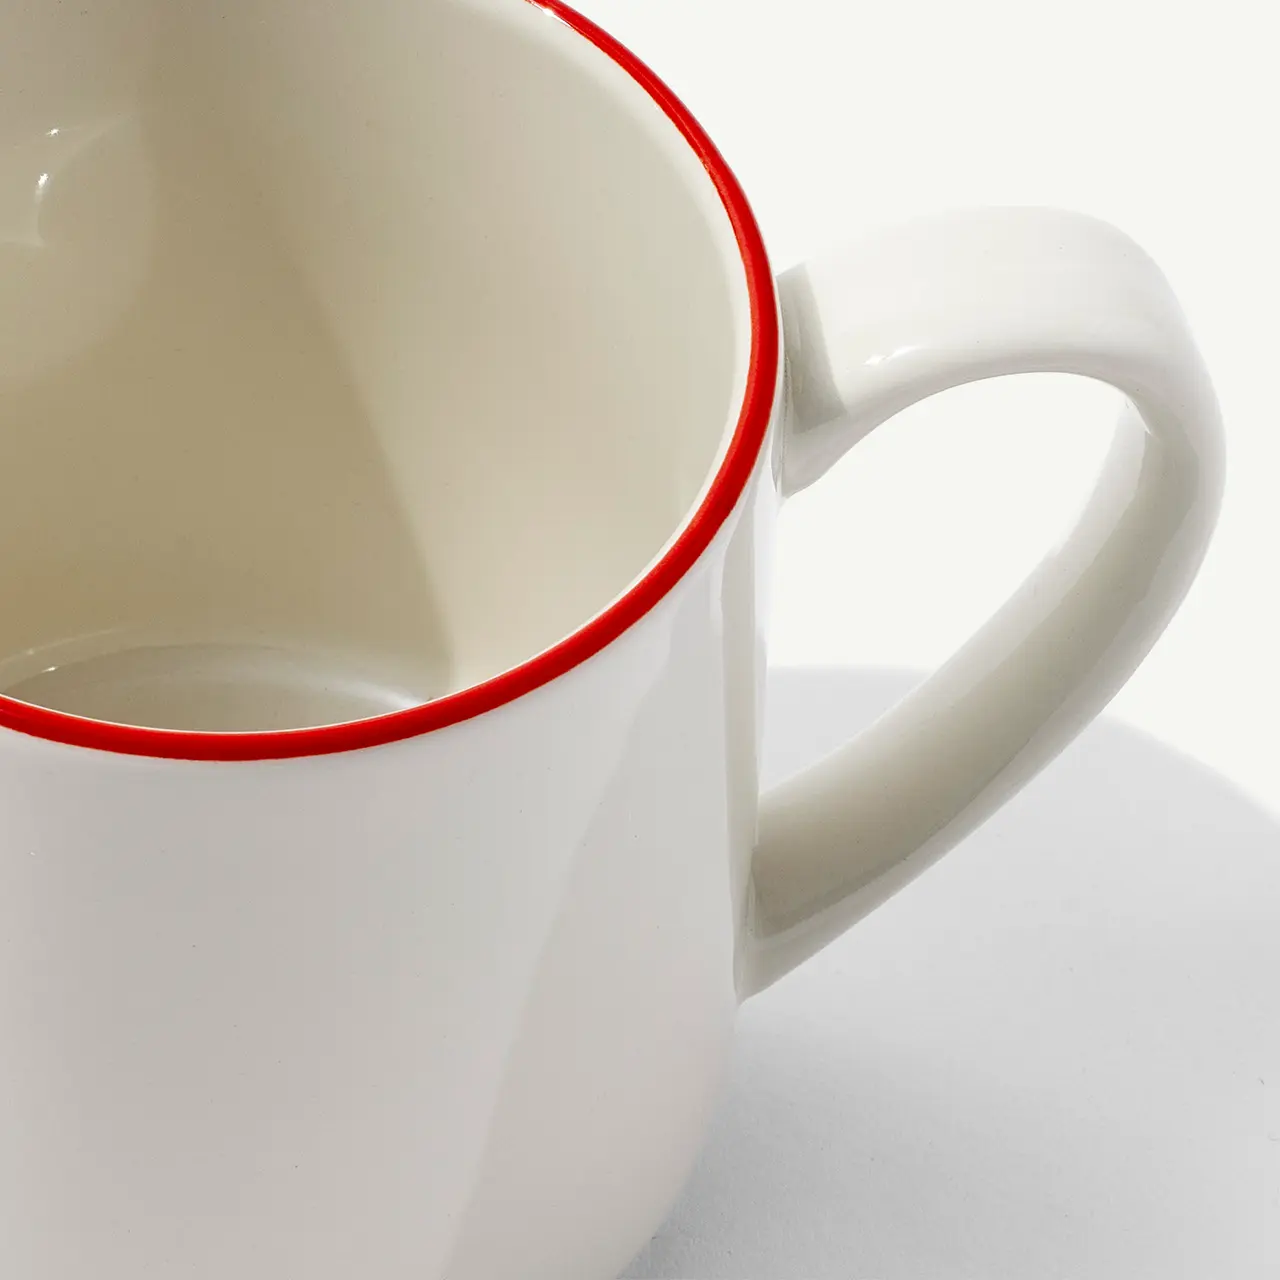 A close-up view of a white mug with a red rim on a white background.